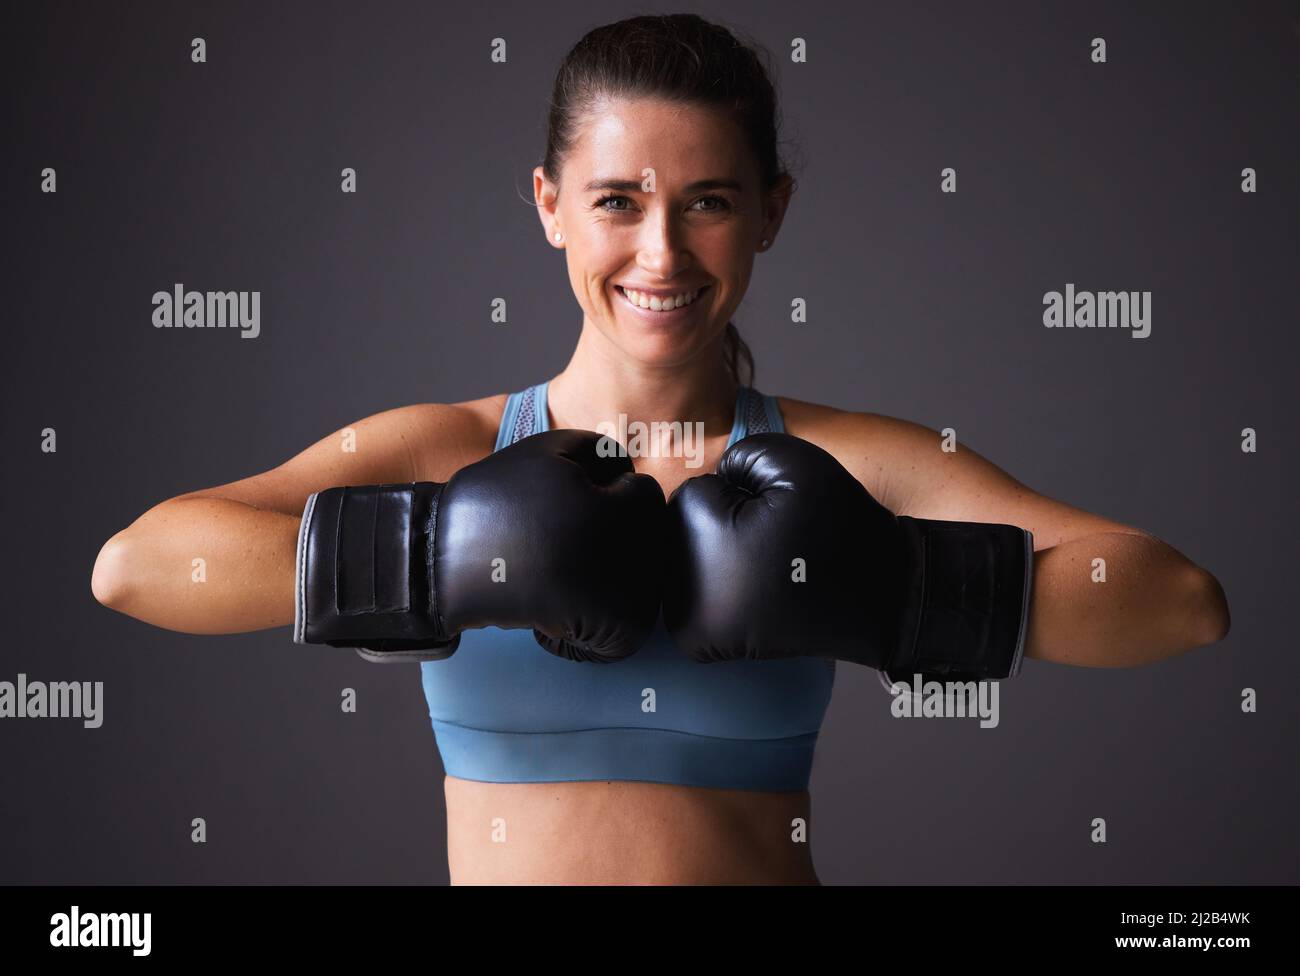 Wanna see how much power are in my punches. Portrait of a young woman wearing boxing gloves against a grey background. Stock Photo